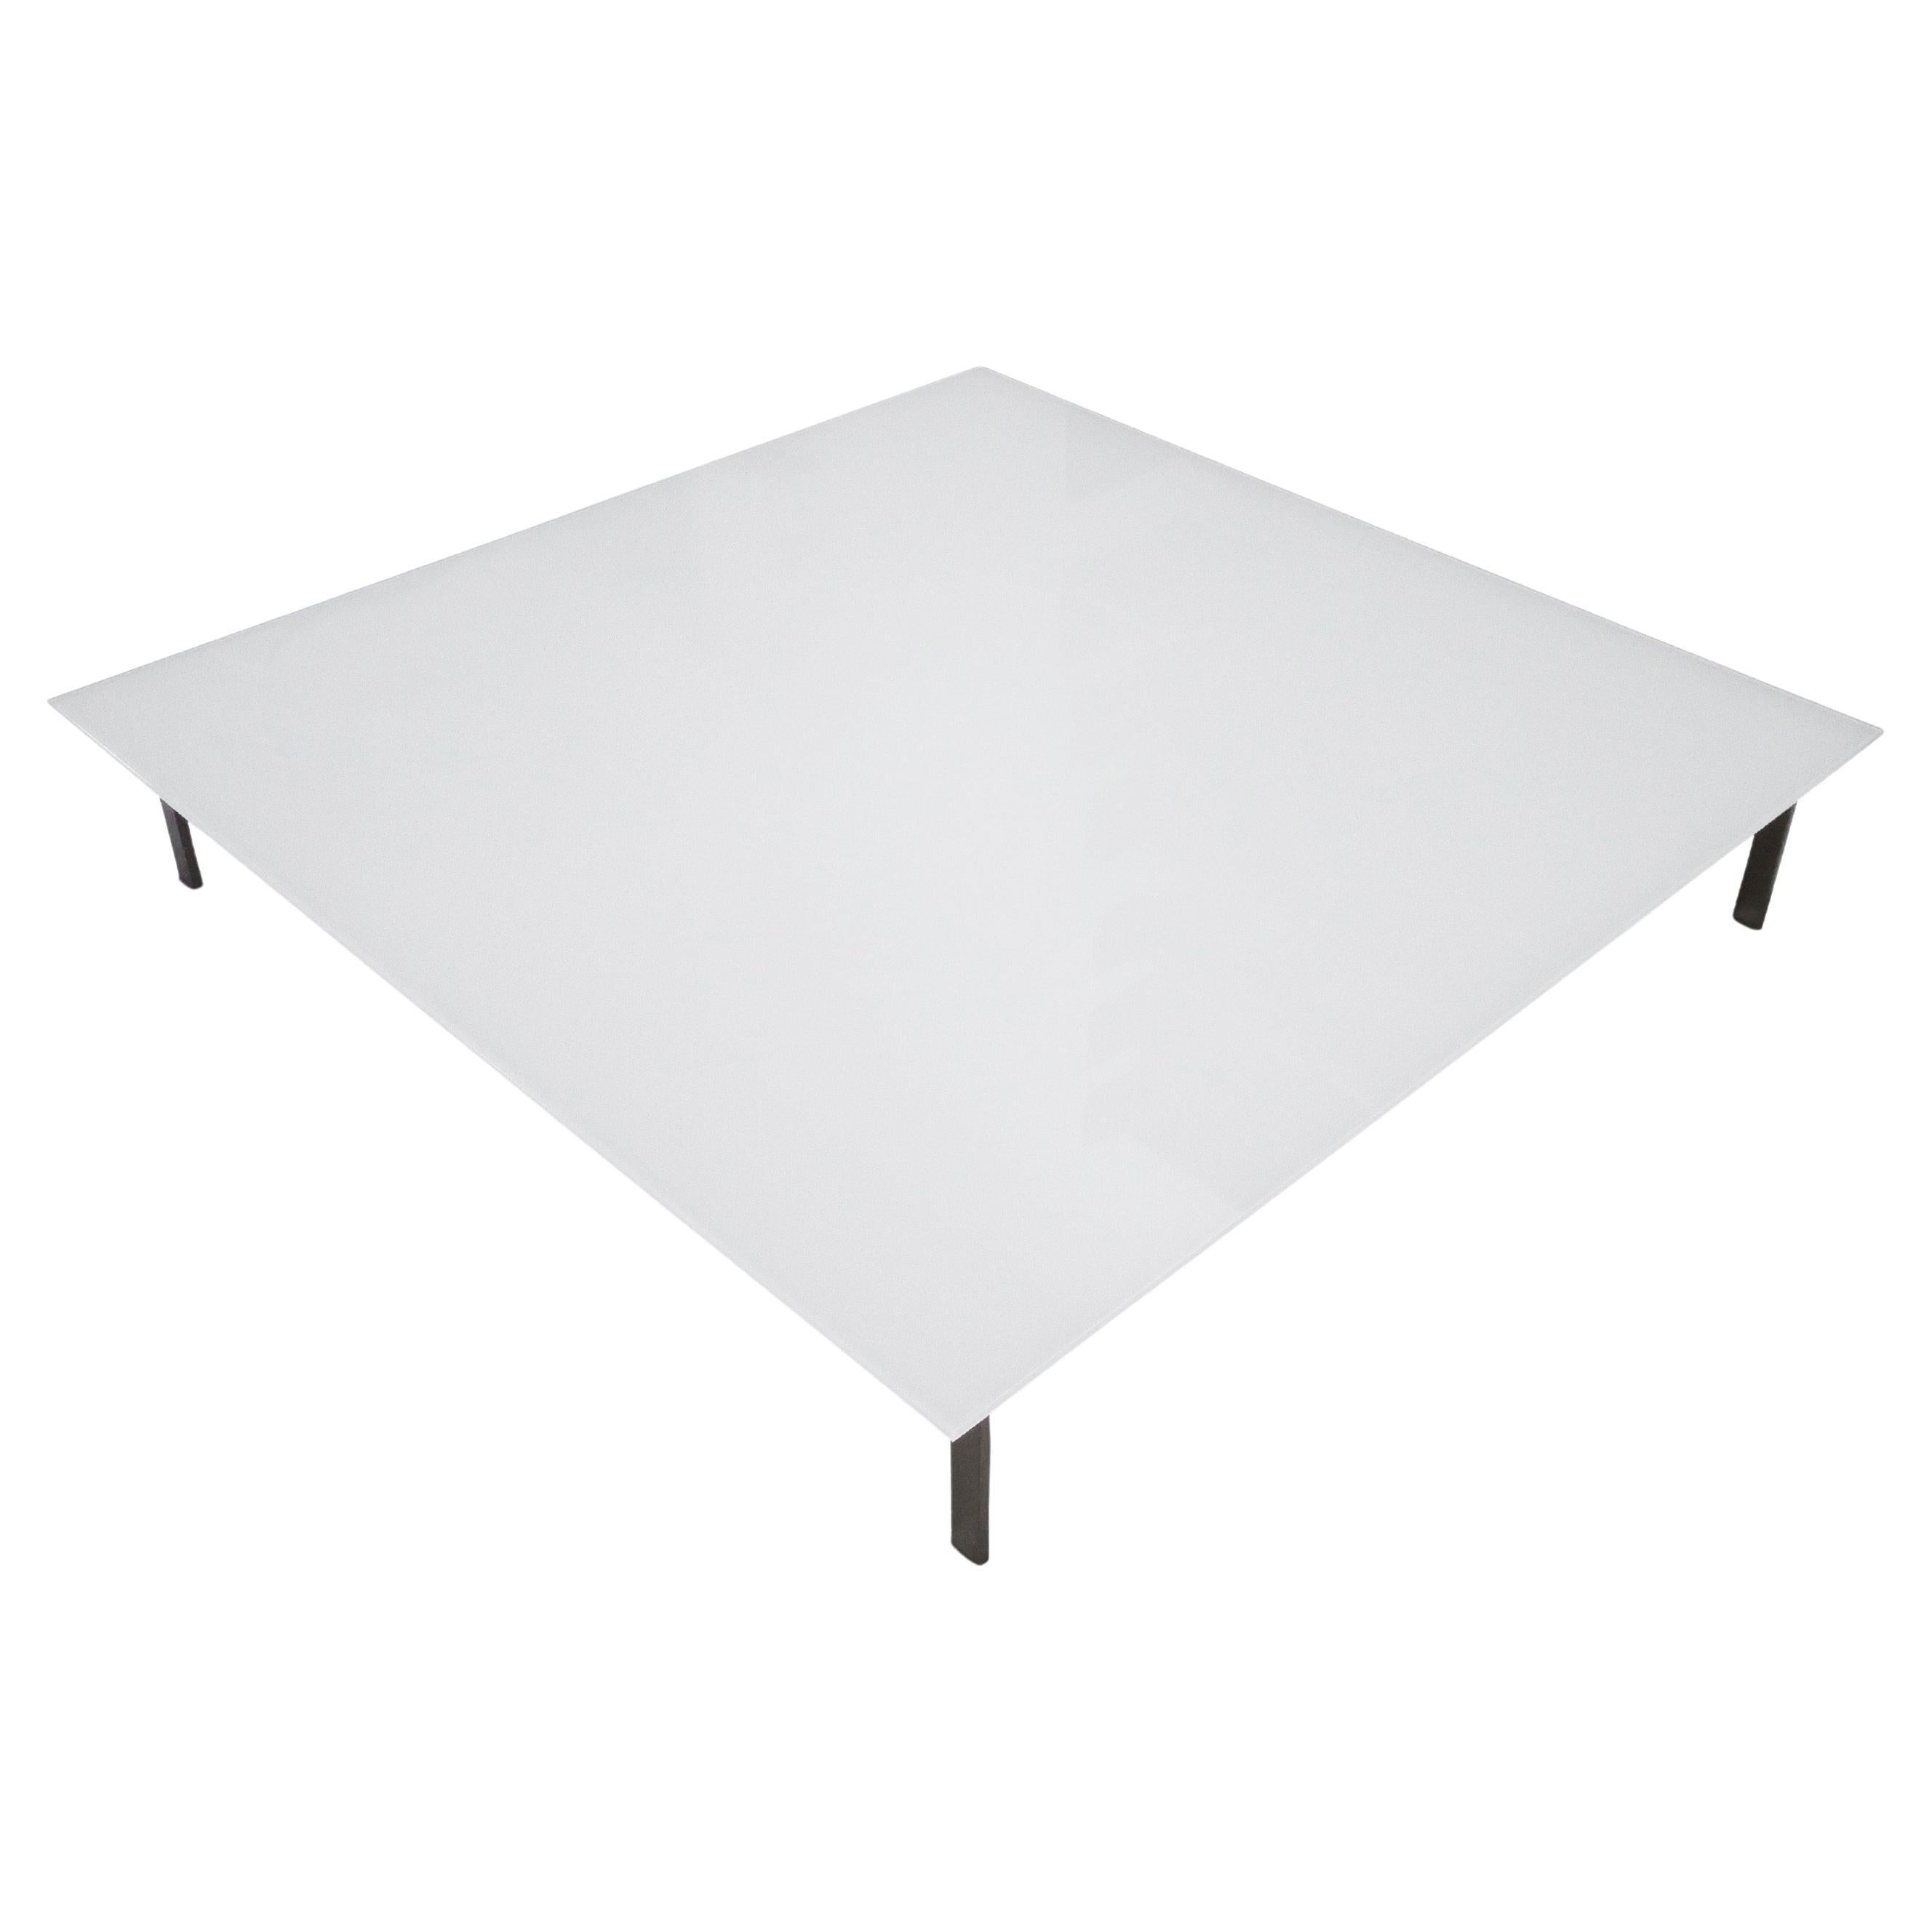 White Metro 2 Cocktail Table by Piero Lissoni for Living Divani For Sale